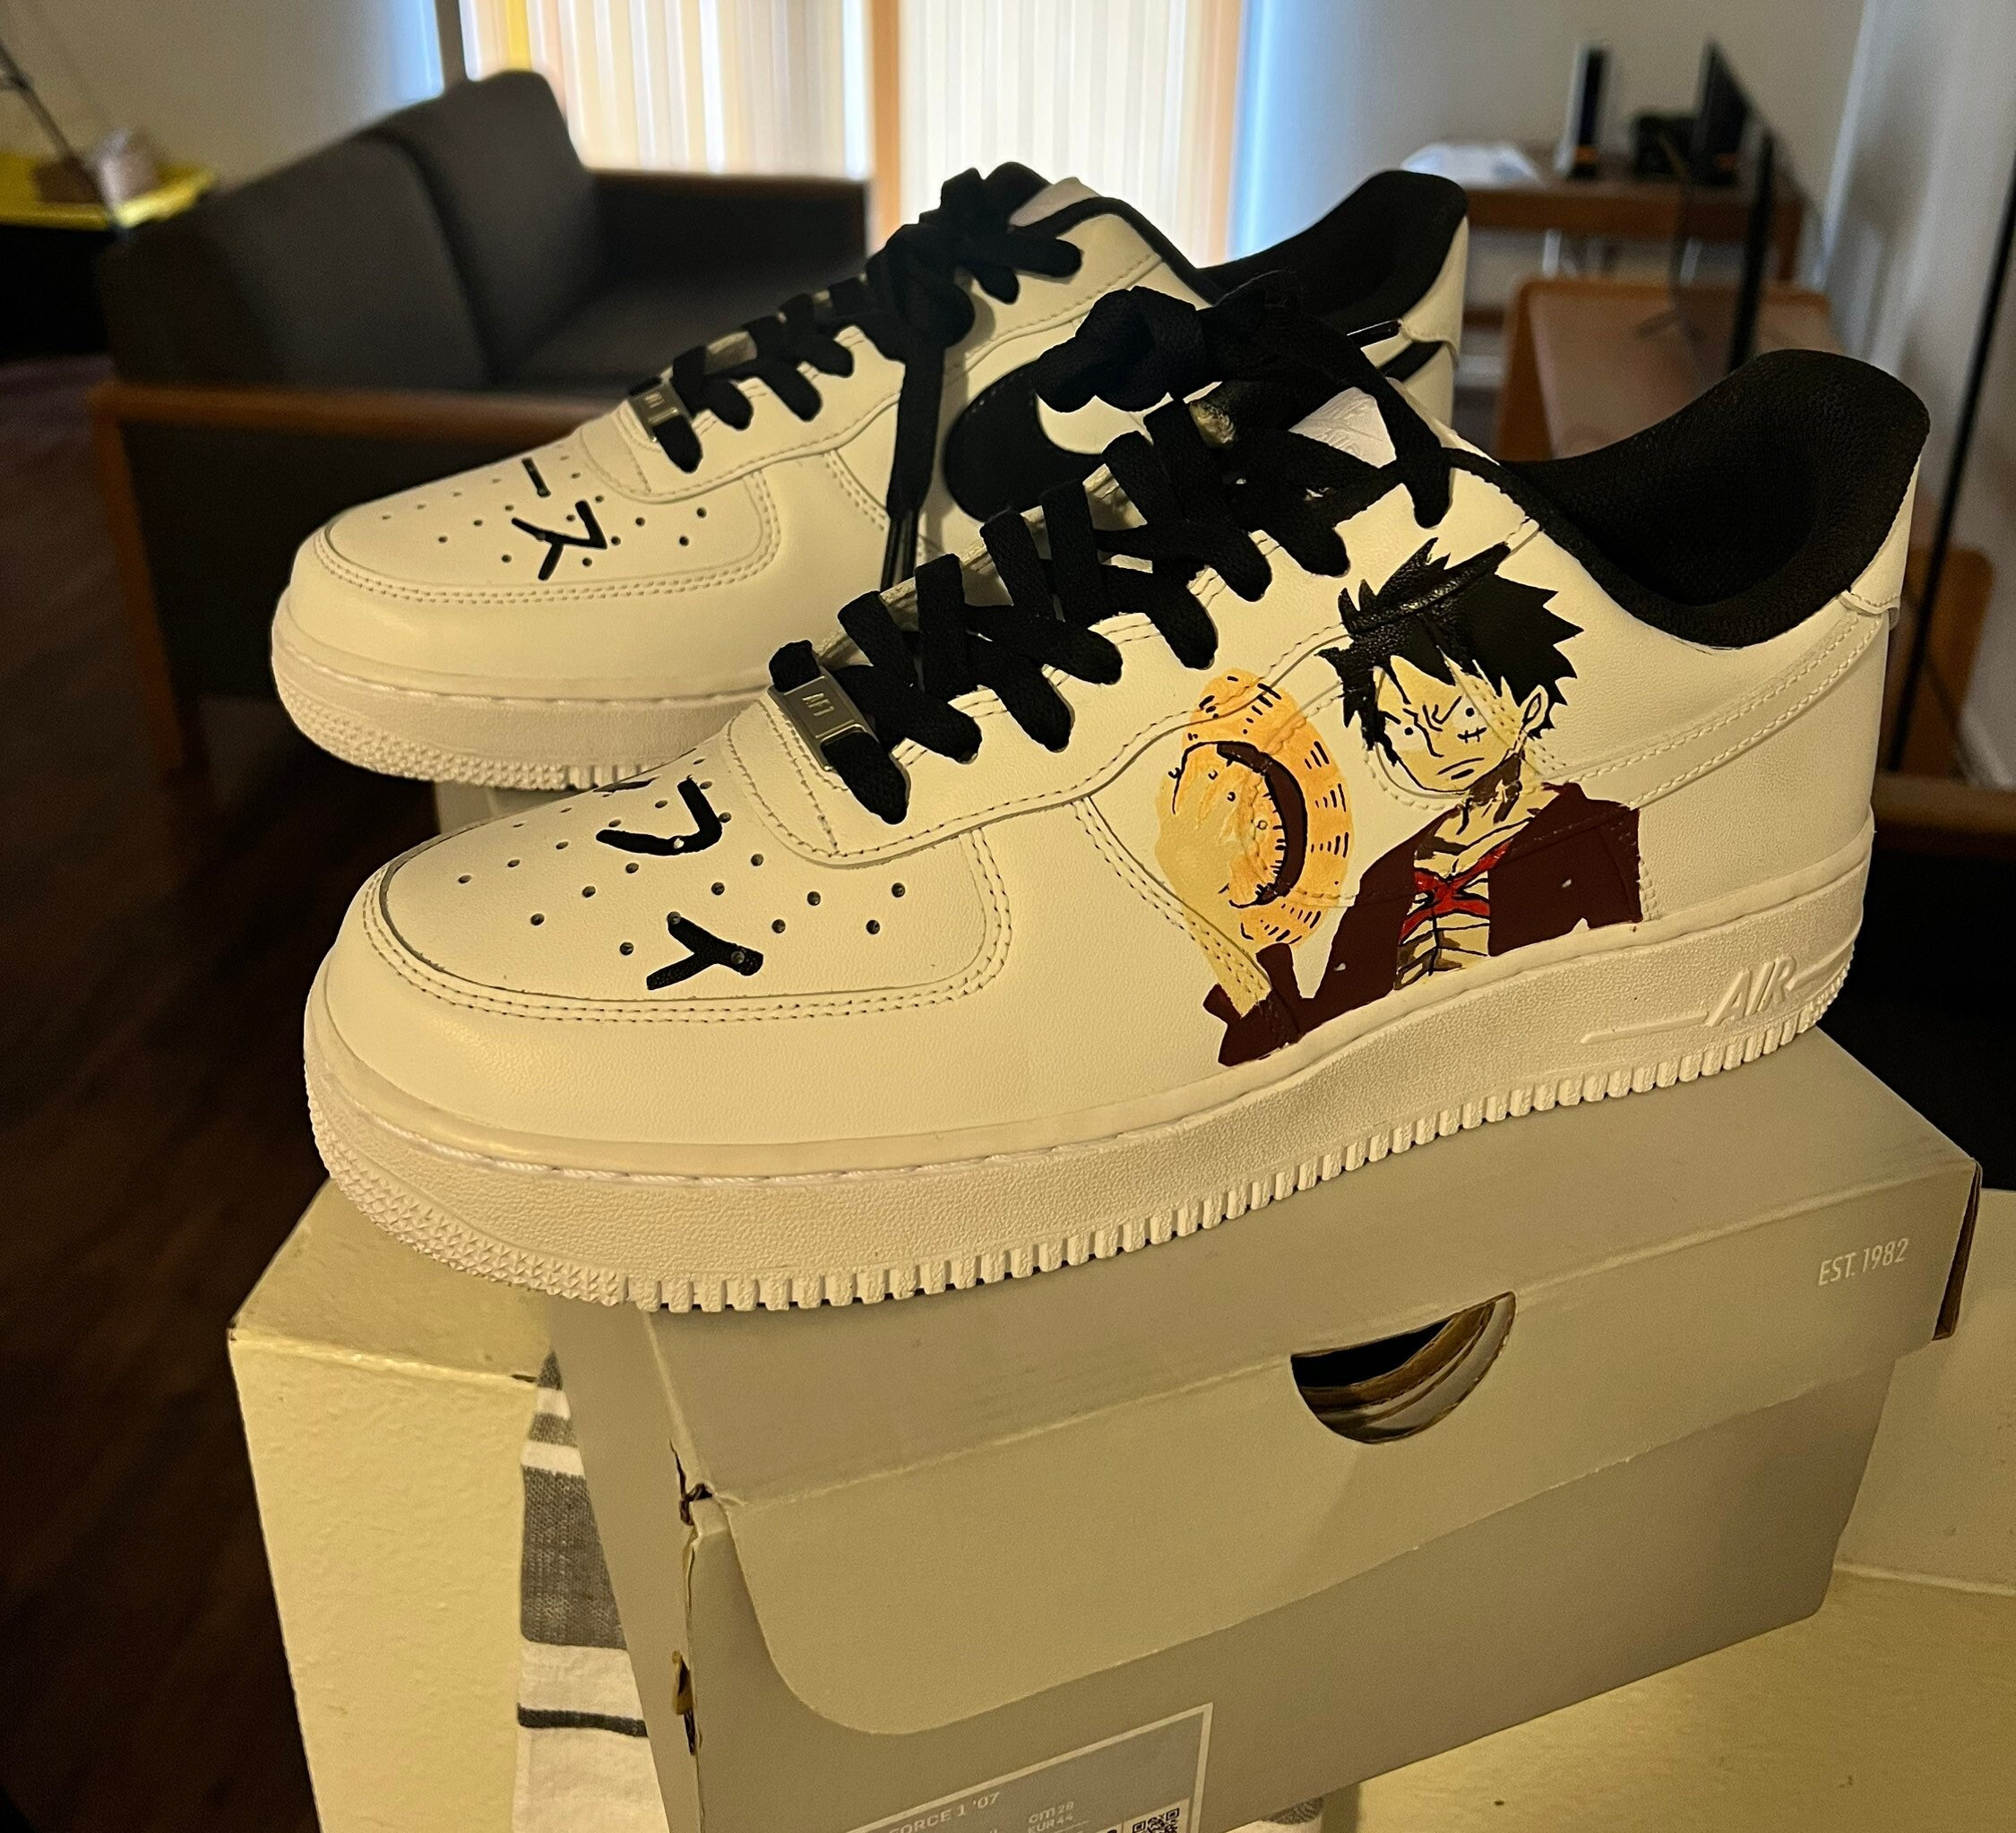 Discover more than 91 one piece anime shoes - in.duhocakina